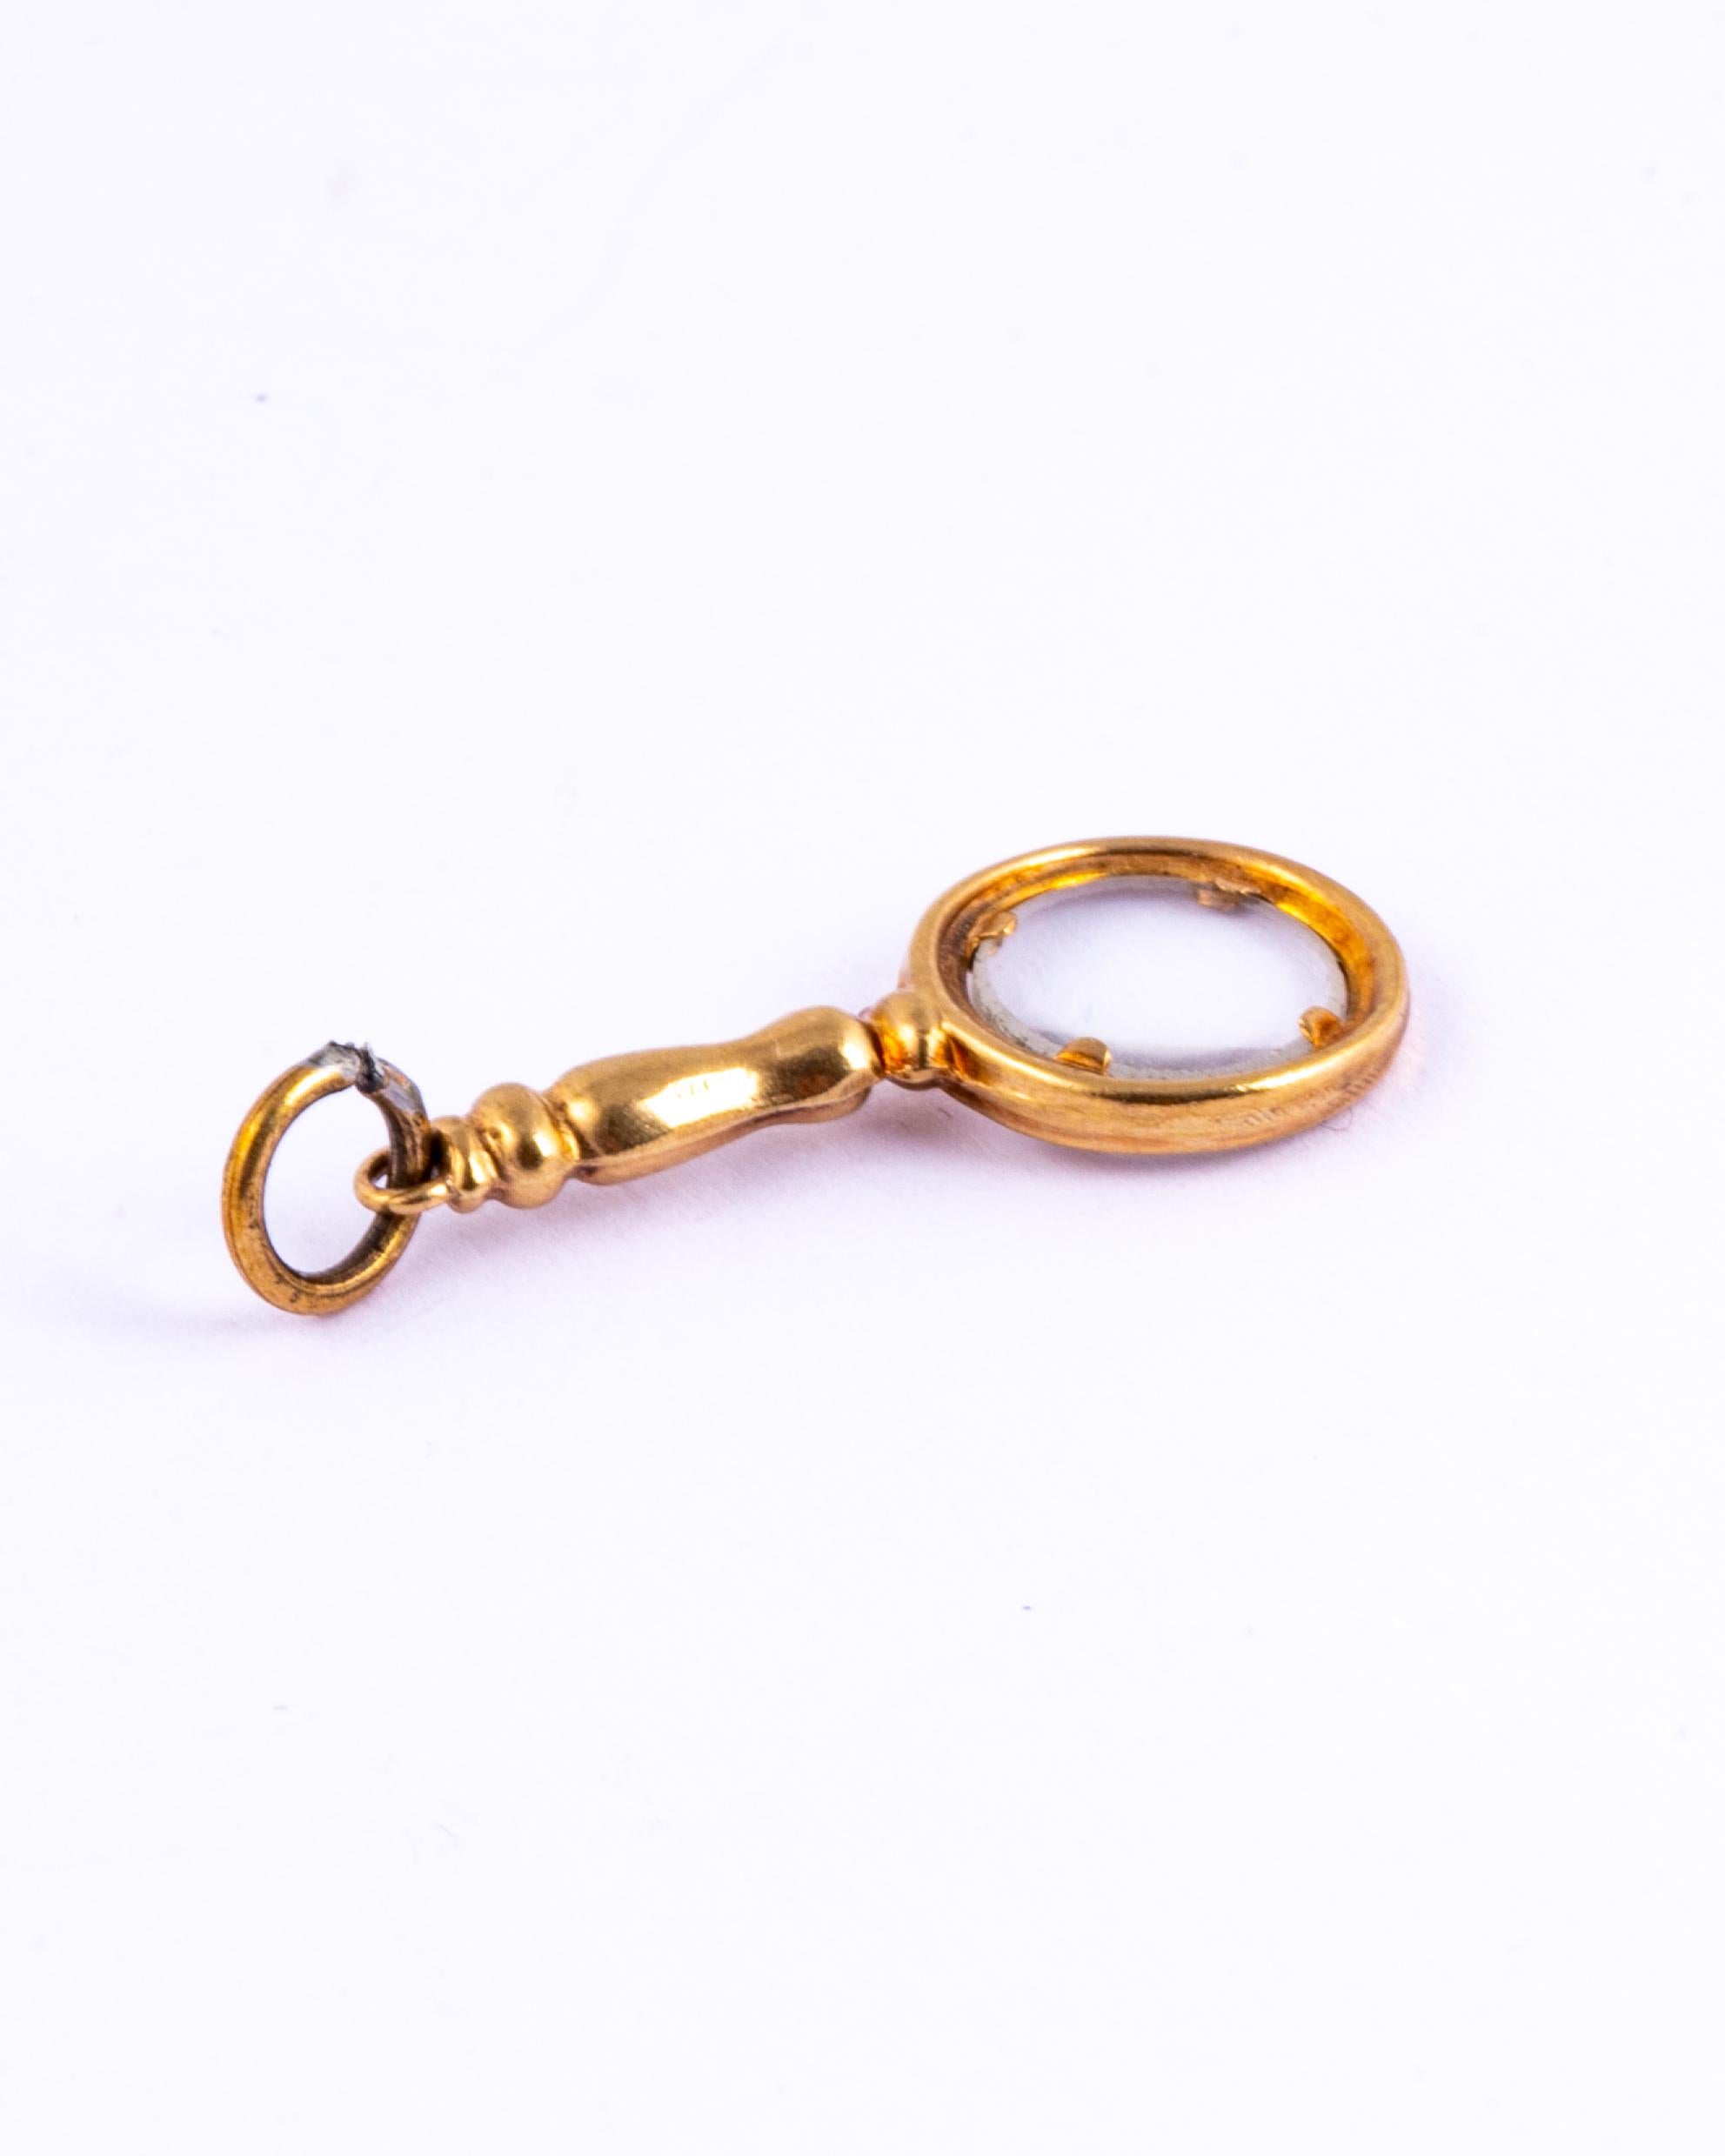 magnifying glass charm